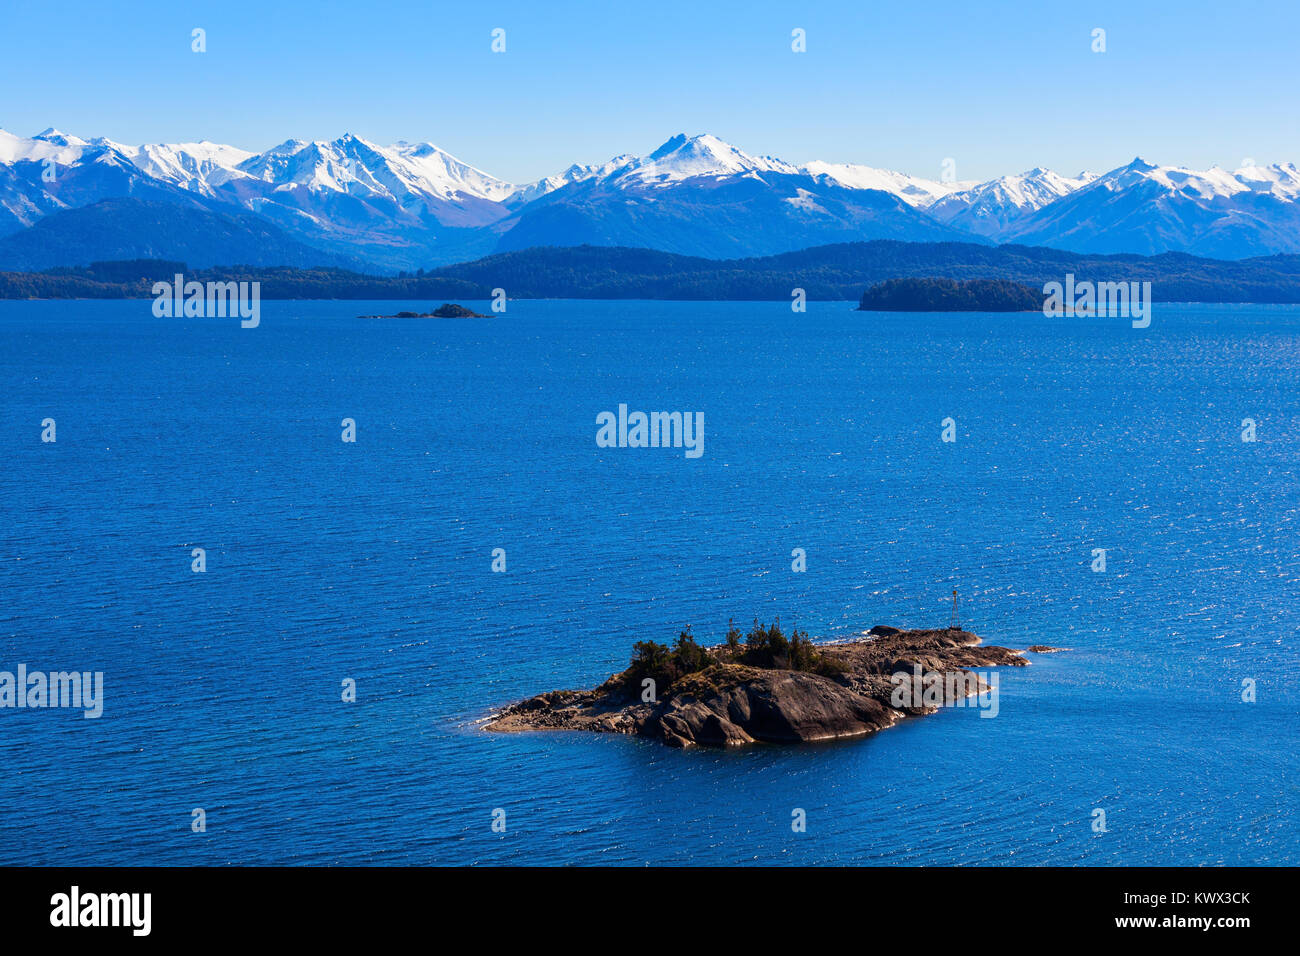 Beauty lake and mountains landscape in Nahuel Huapi National Park, located near Bariloche, Patagonia region in Argentina. Stock Photo